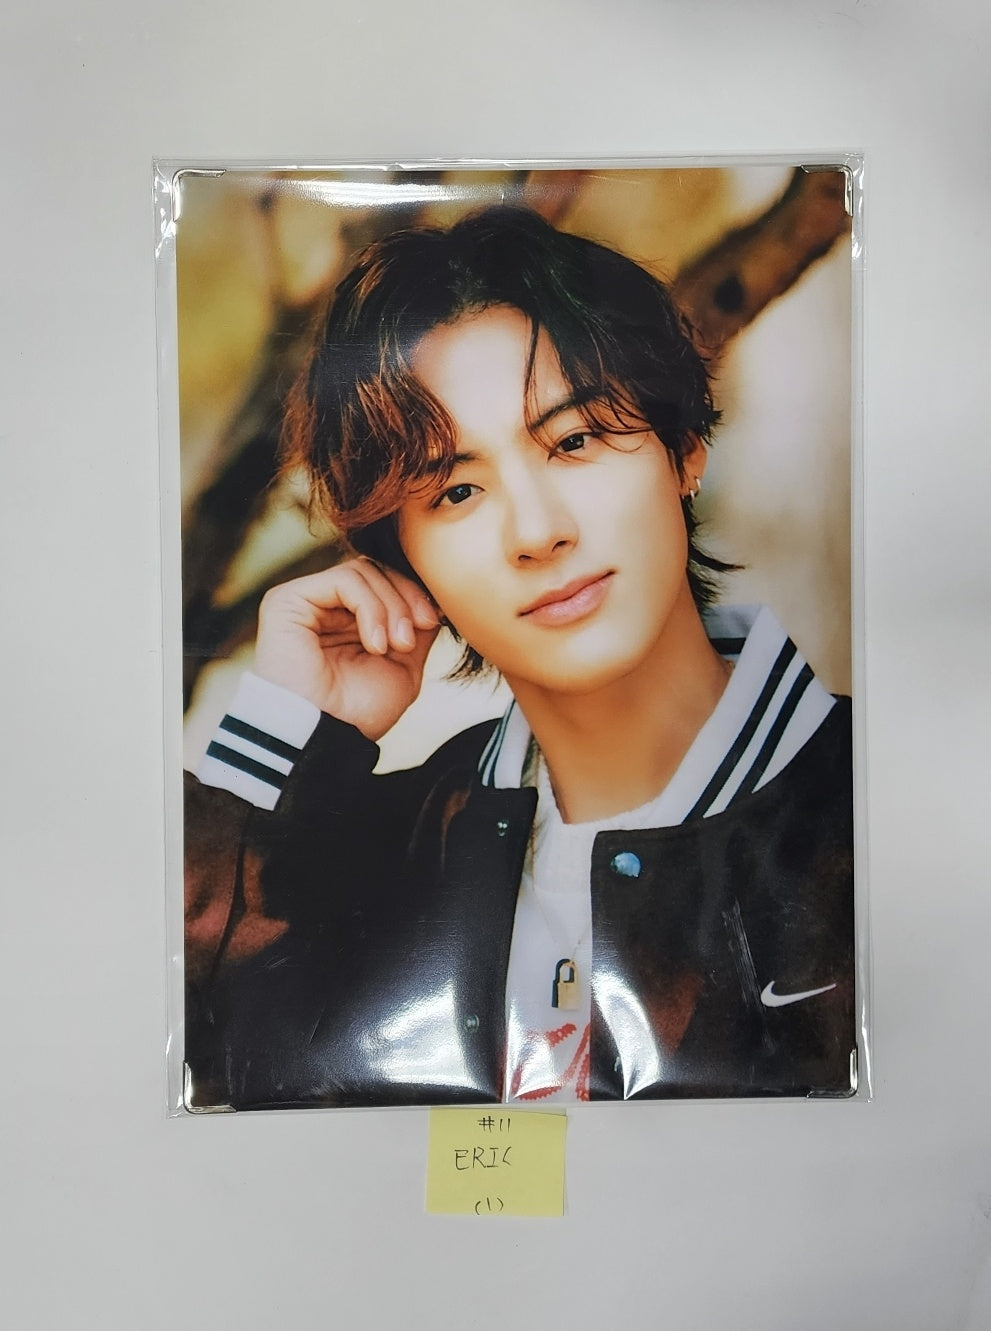 THE BOYZ "FAN CON : THE B-ROAD" - Official MD [Special Photo] [Updated 1/3]